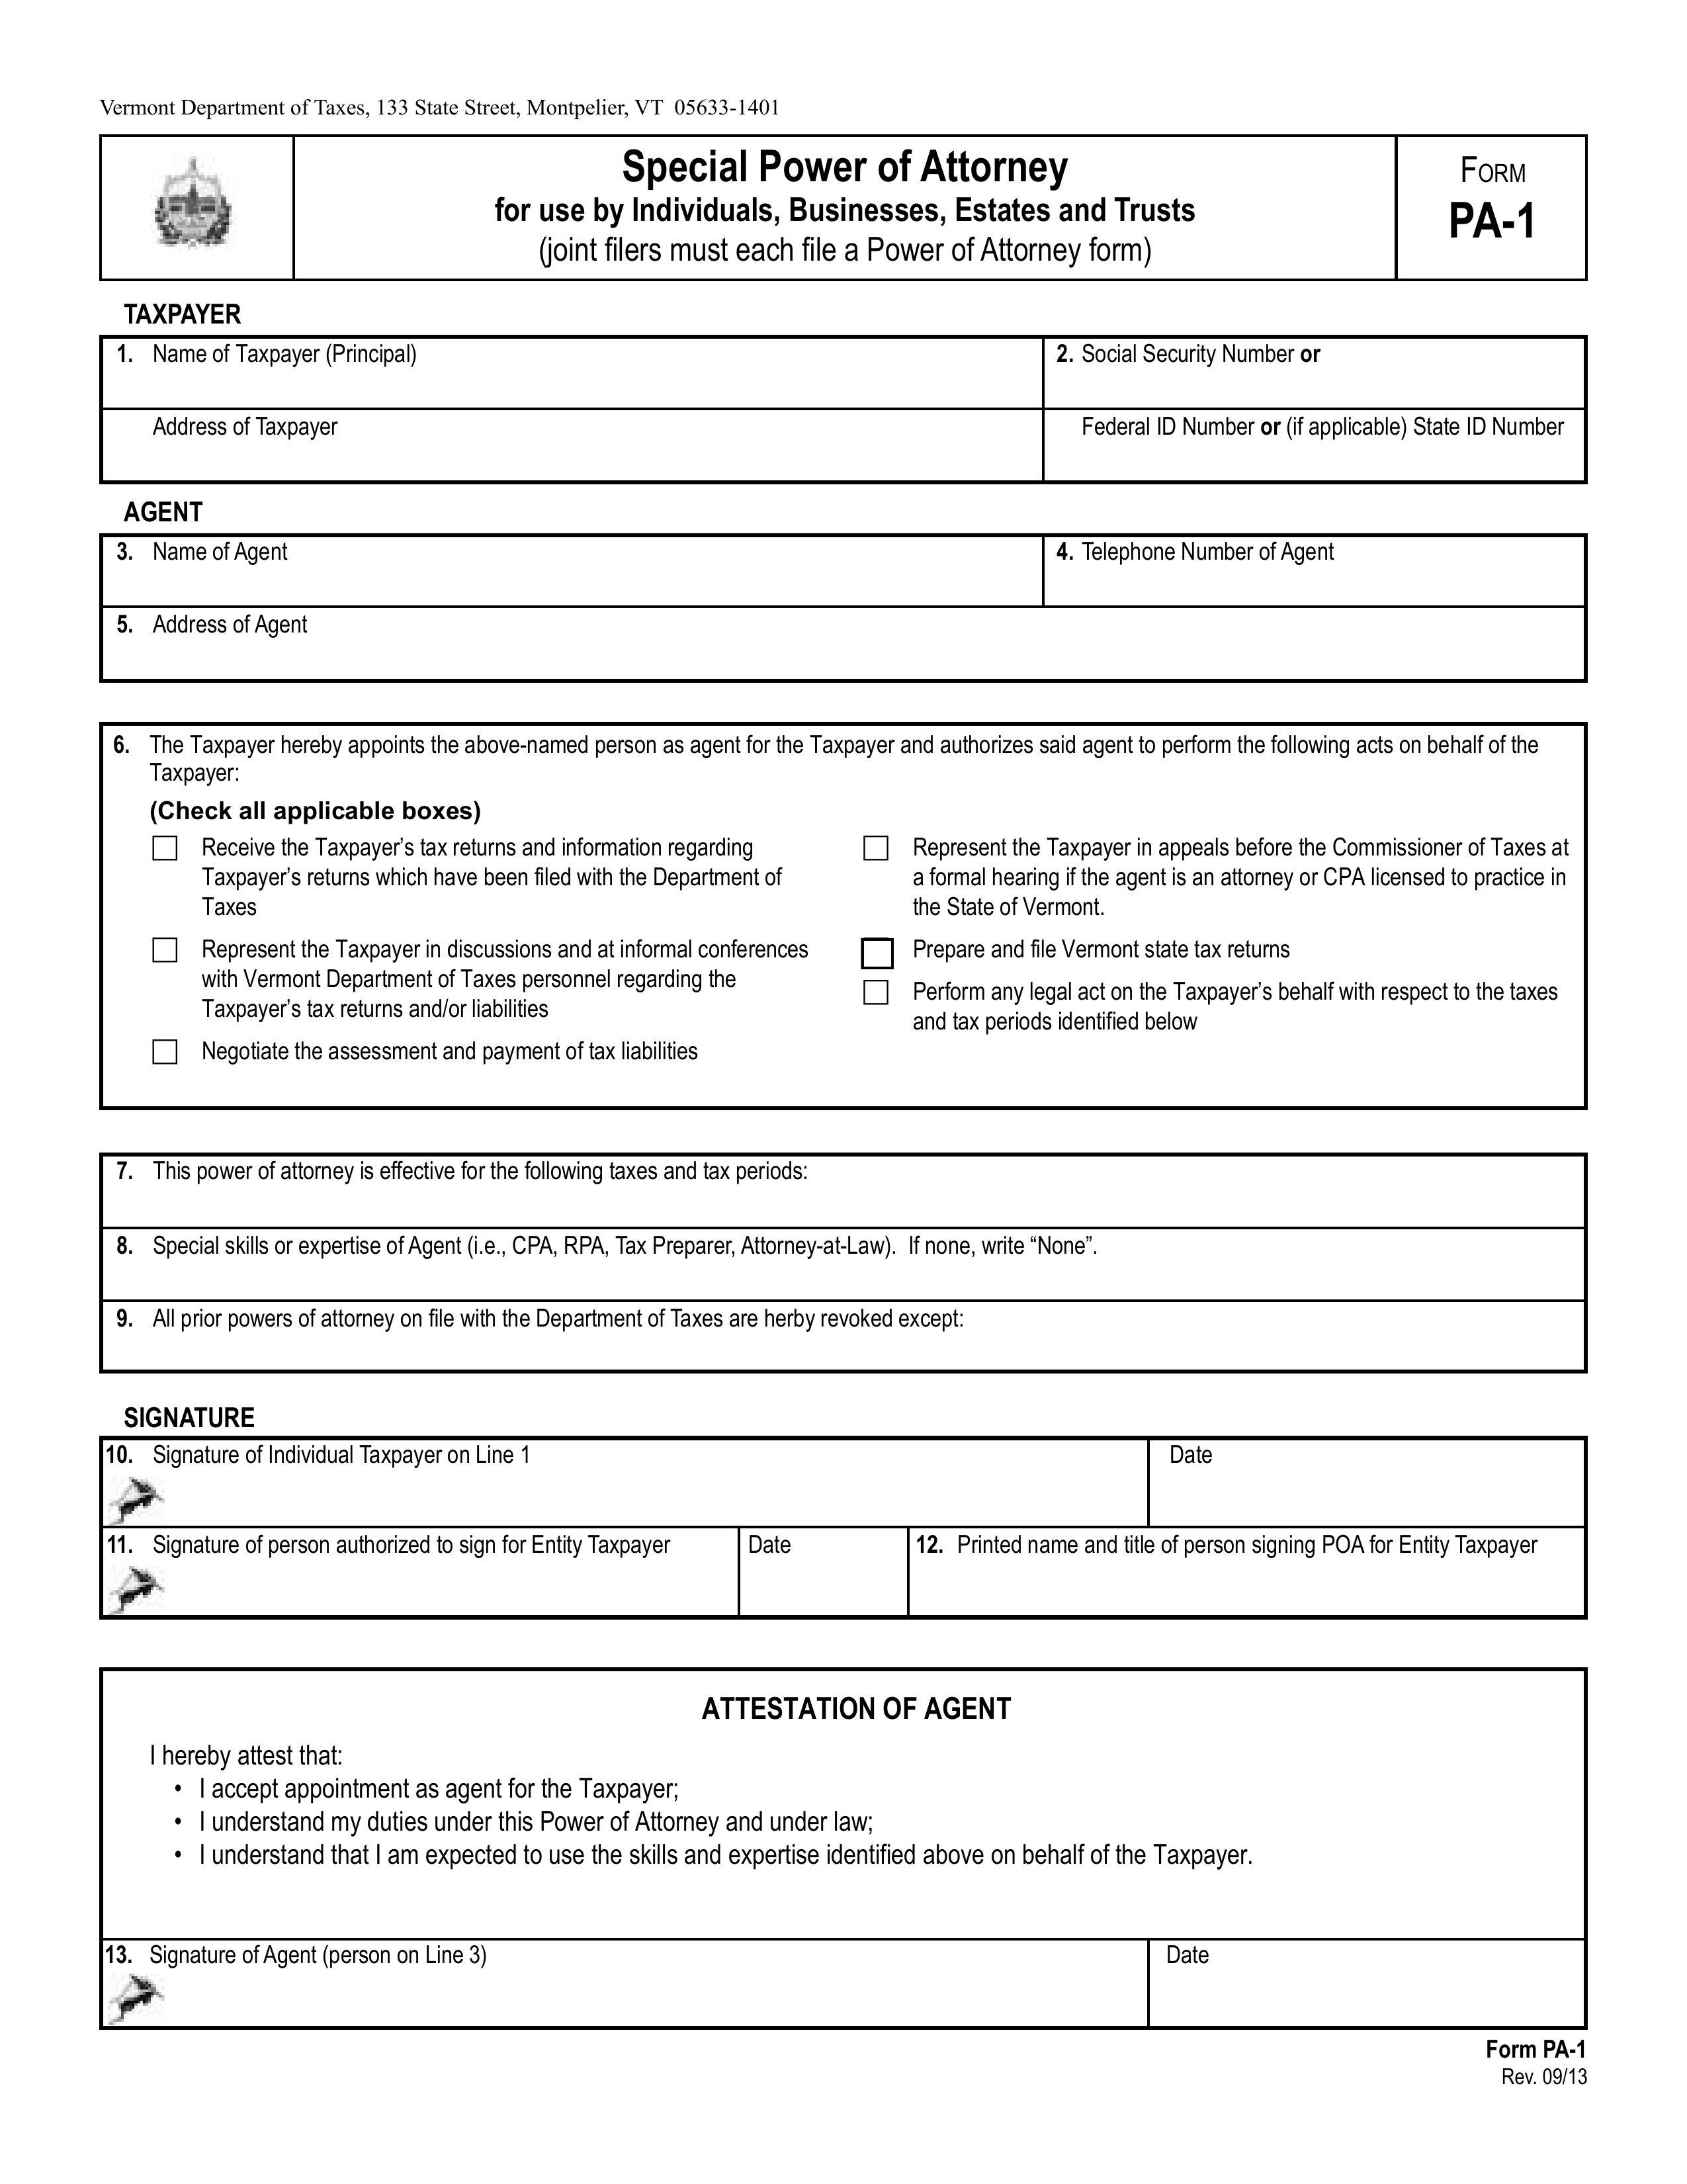 Vermont Tax Power Of Attorney Form PA 1 EForms Free 